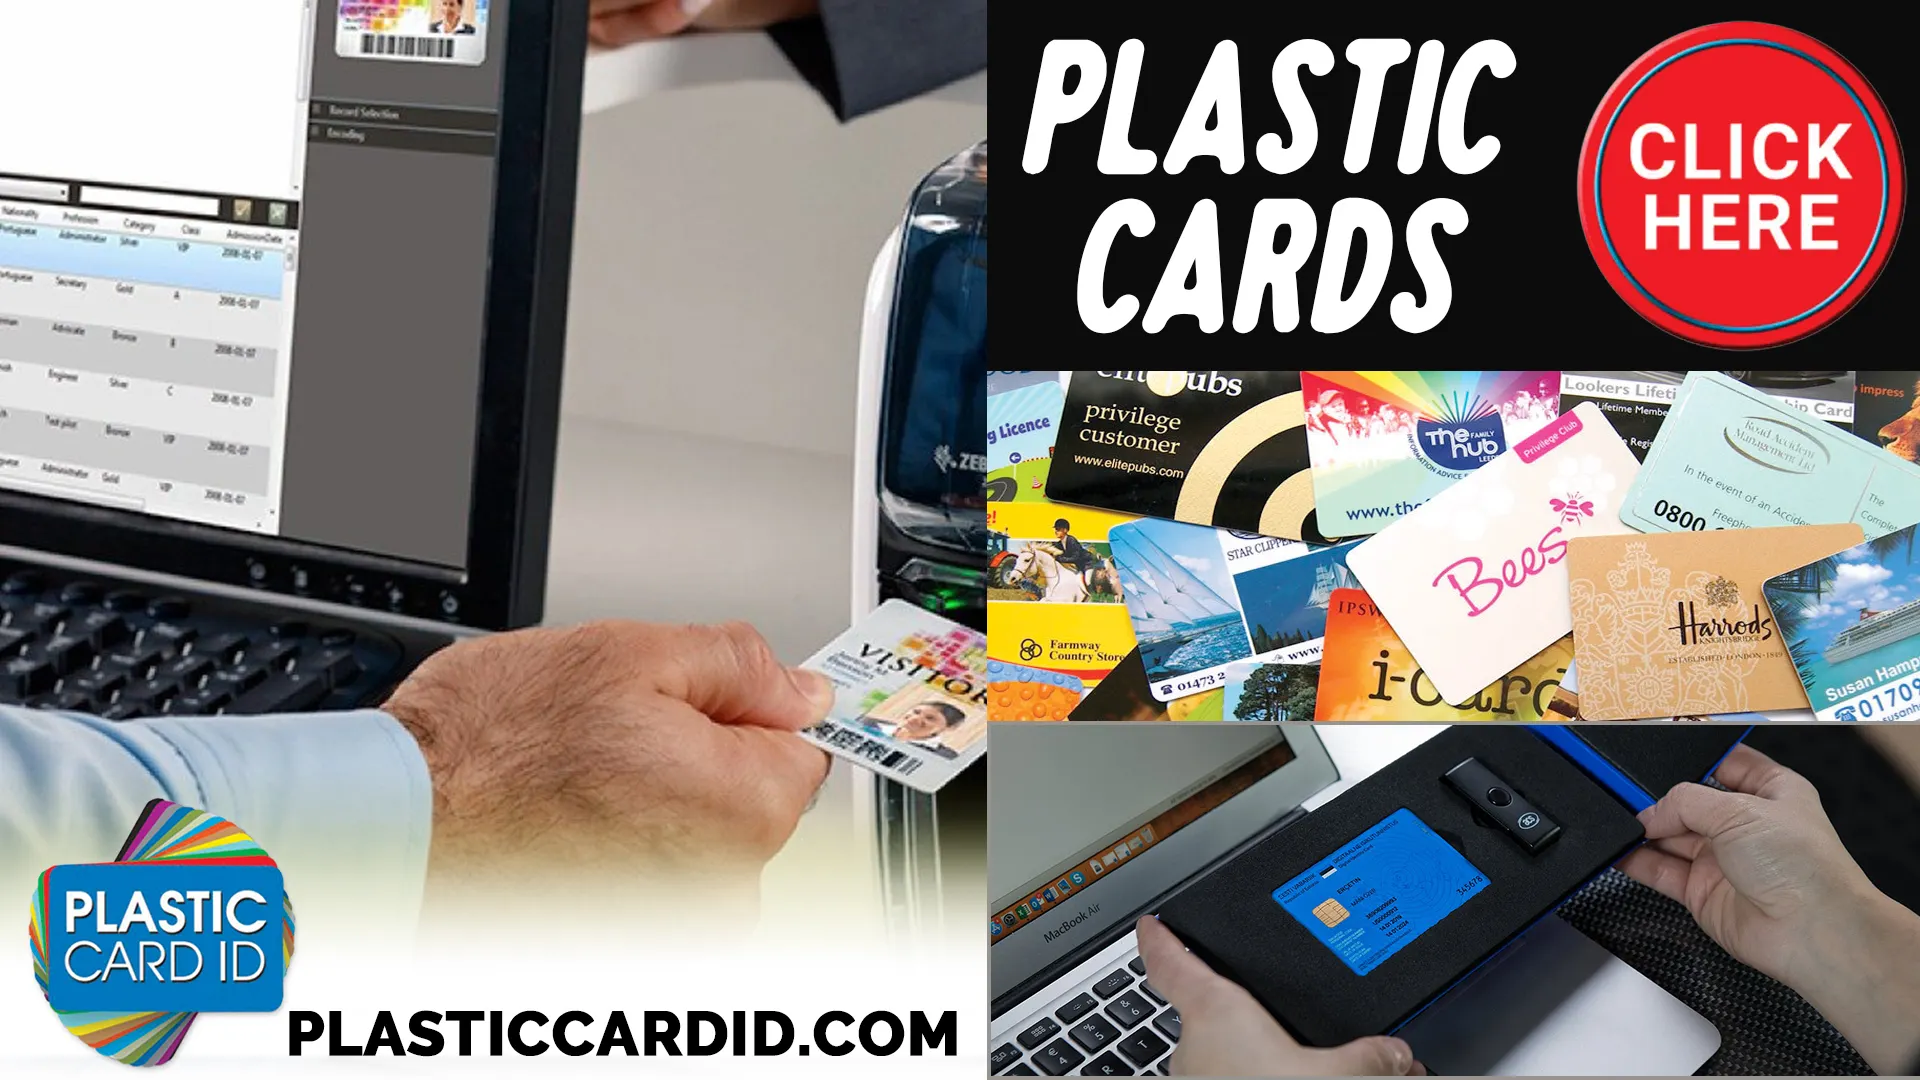 Welcome to Plastic Card ID
: Your Go-To Source for Fargo Printer Assurance